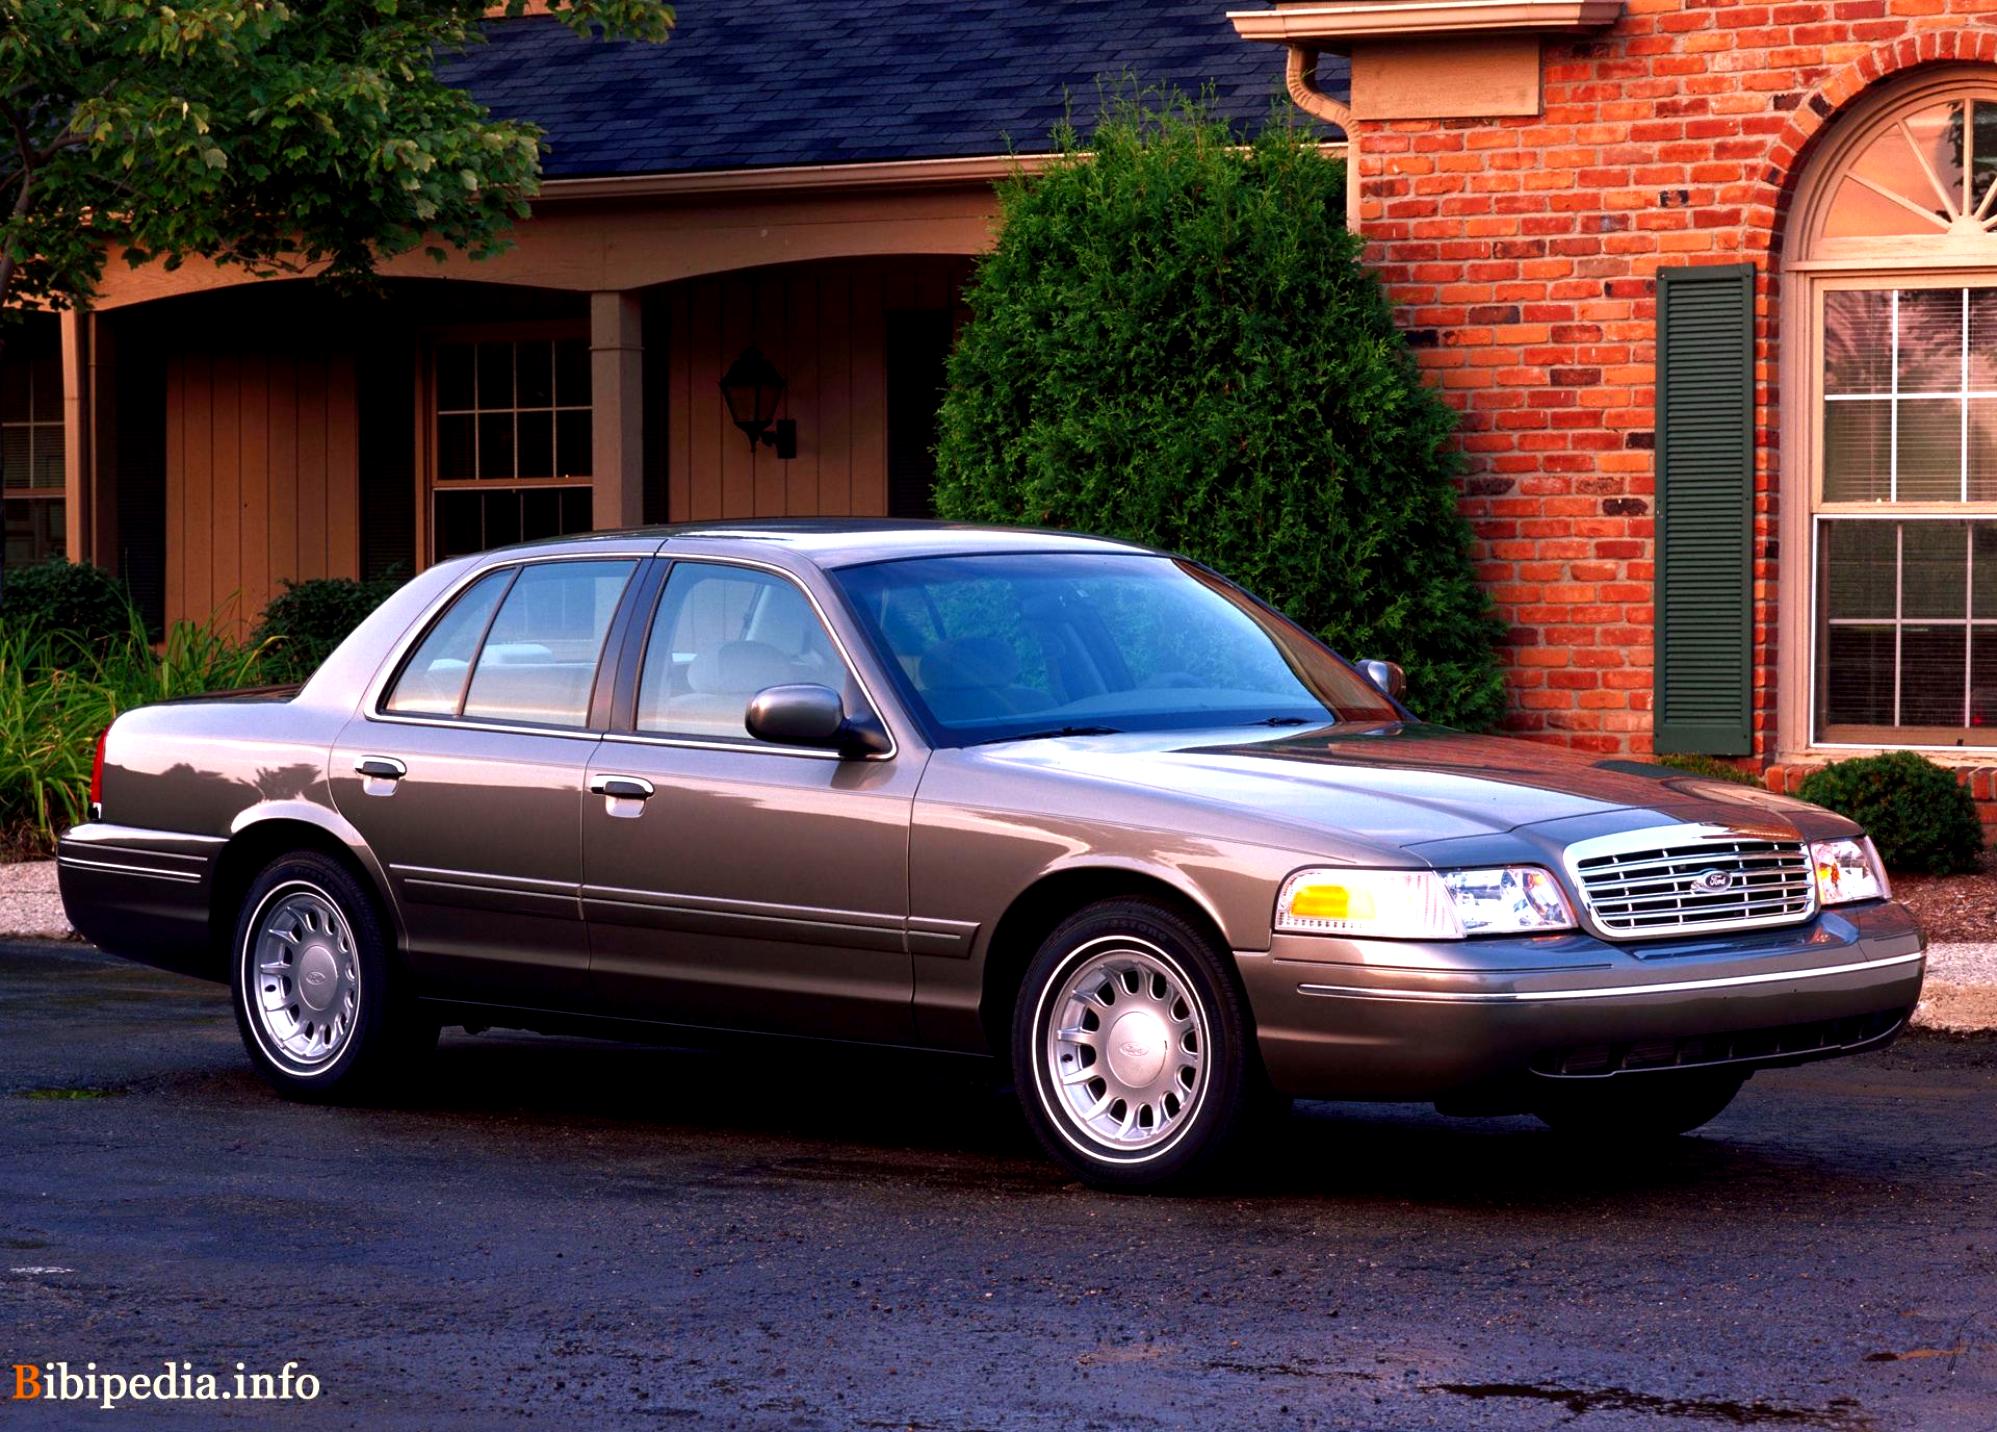 Ford Crown Victoria 1998 #44